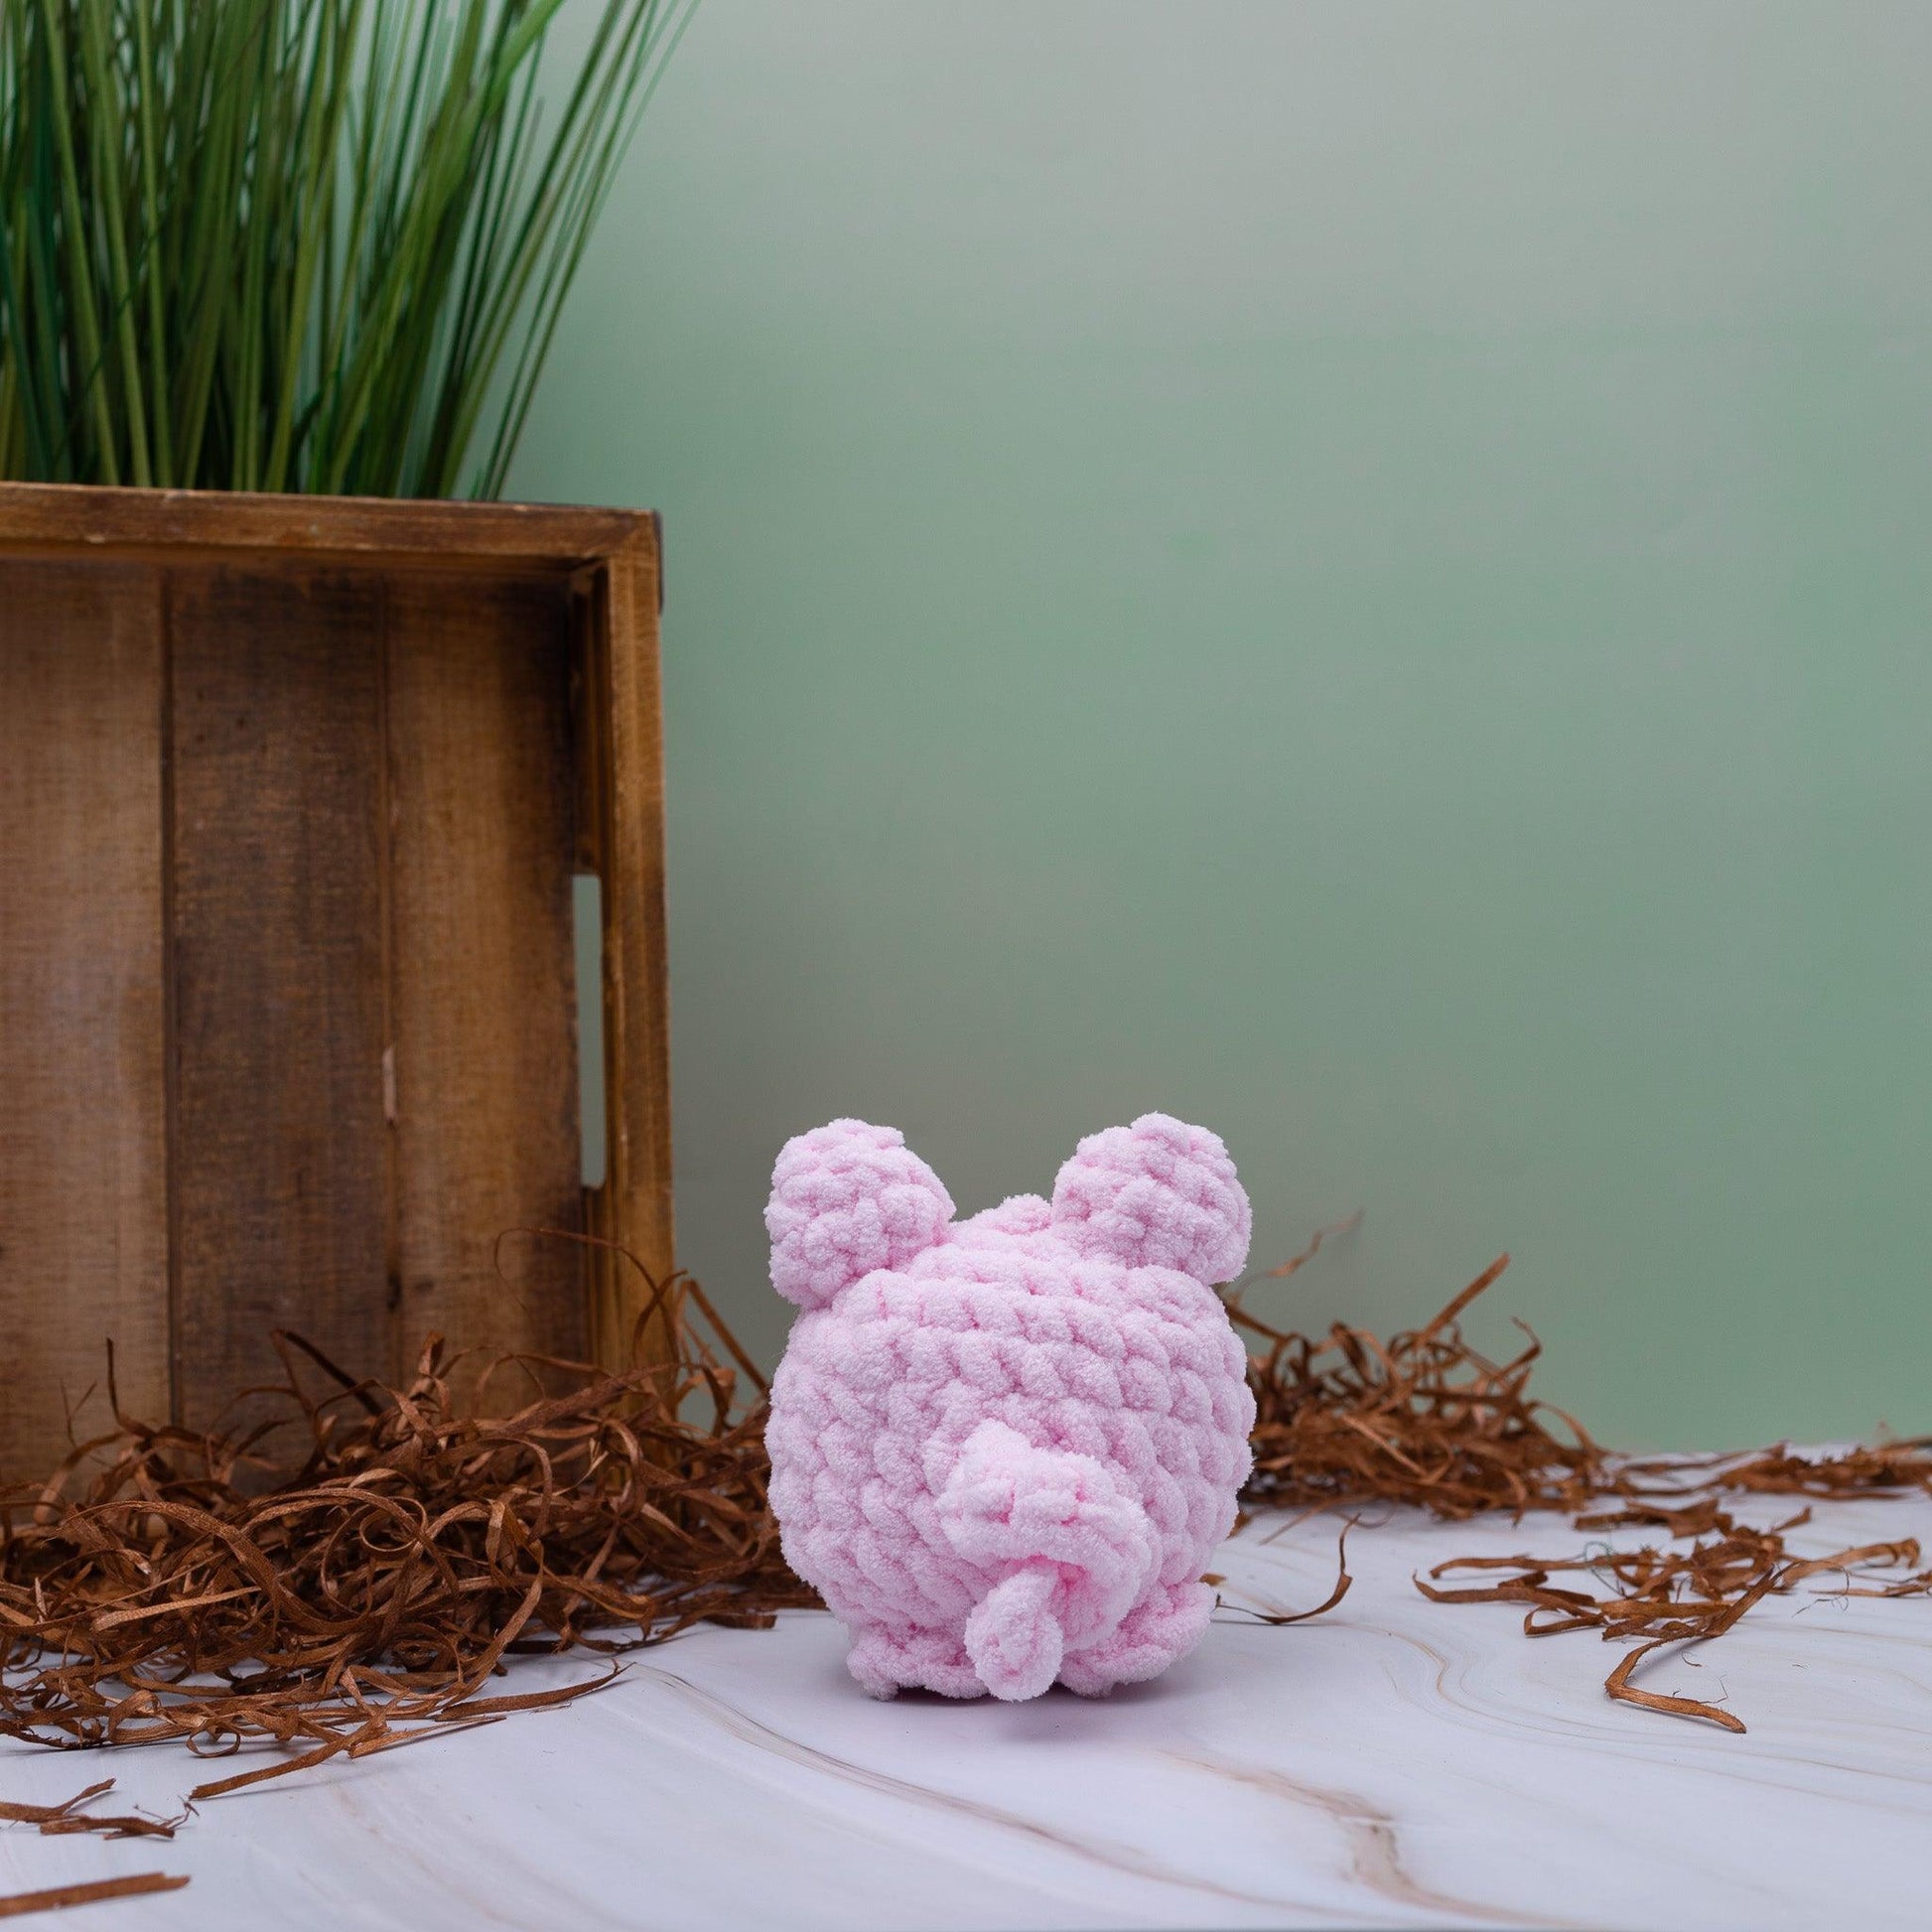 4Stitches Designs 6 Inch Crochet Mini Pig Plush Toy - Hand-Made Stuffed Animal Gift for Kids